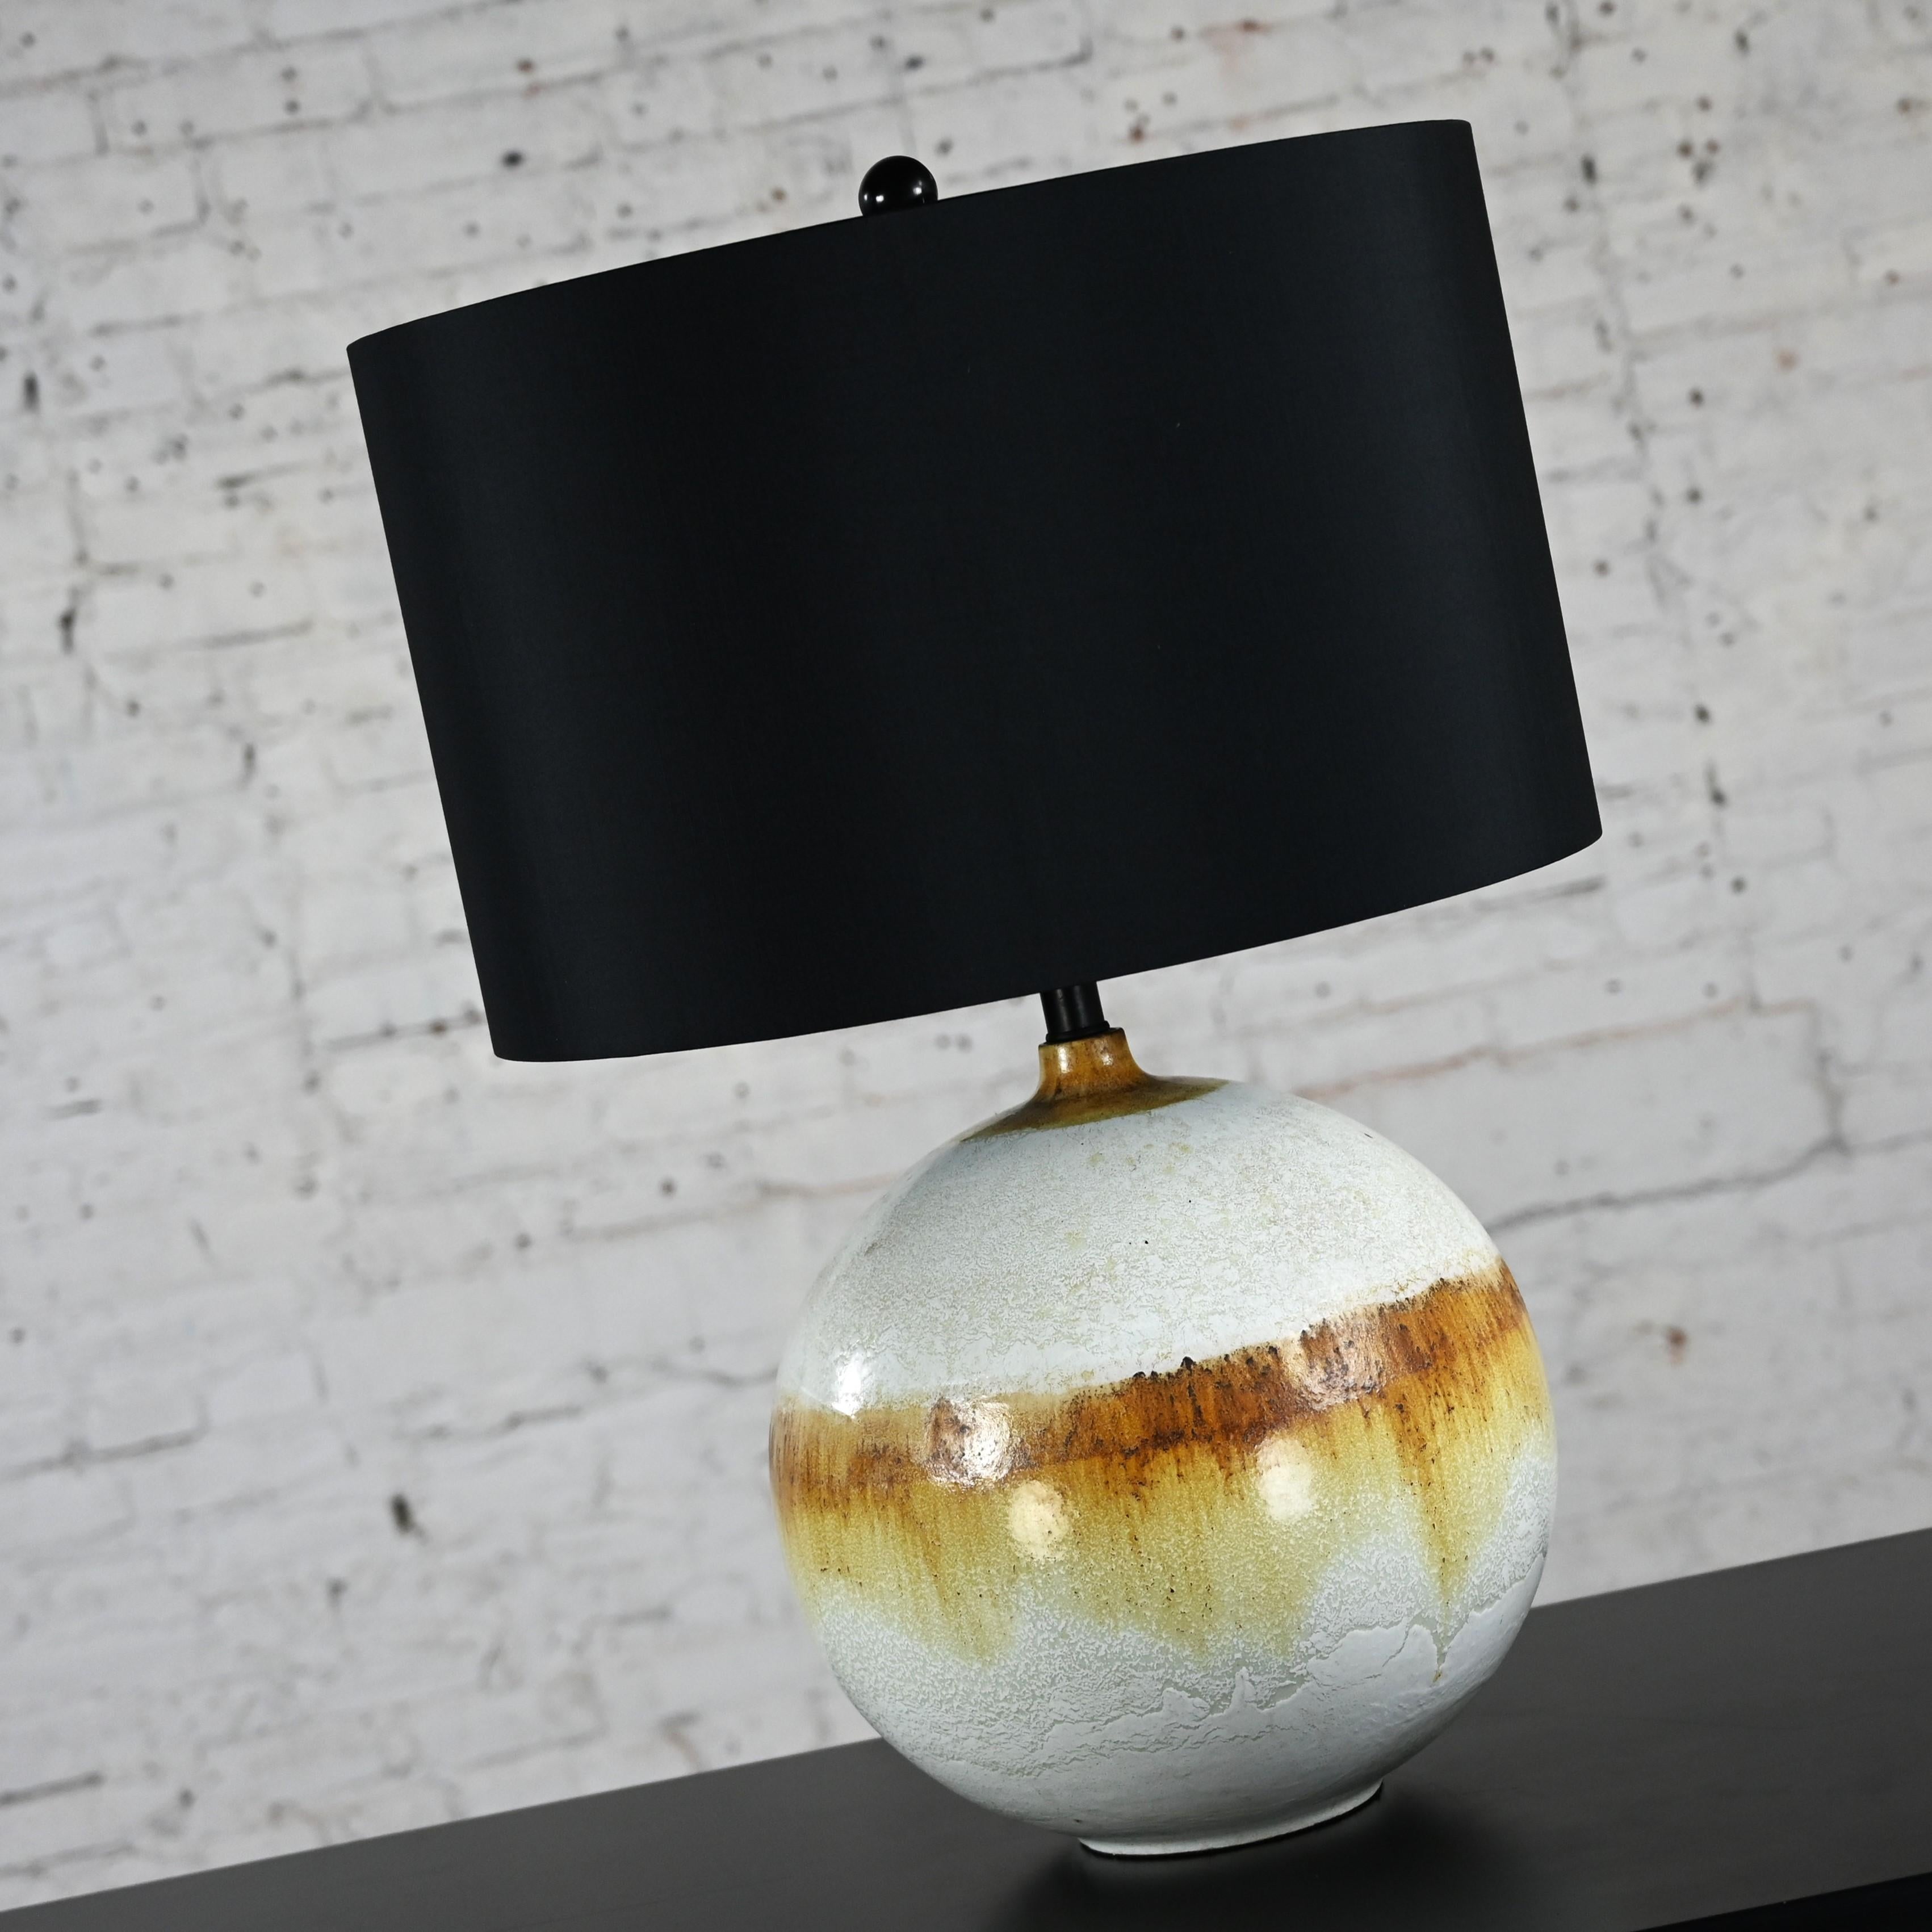 Fabulous vintage Mid-Century Modern drip glaze ceramic ball lamp with a new silk-like black drum shade. Beautiful condition, keeping in mind that this is vintage and not new so will have signs of use and wear even if it has been refinished or